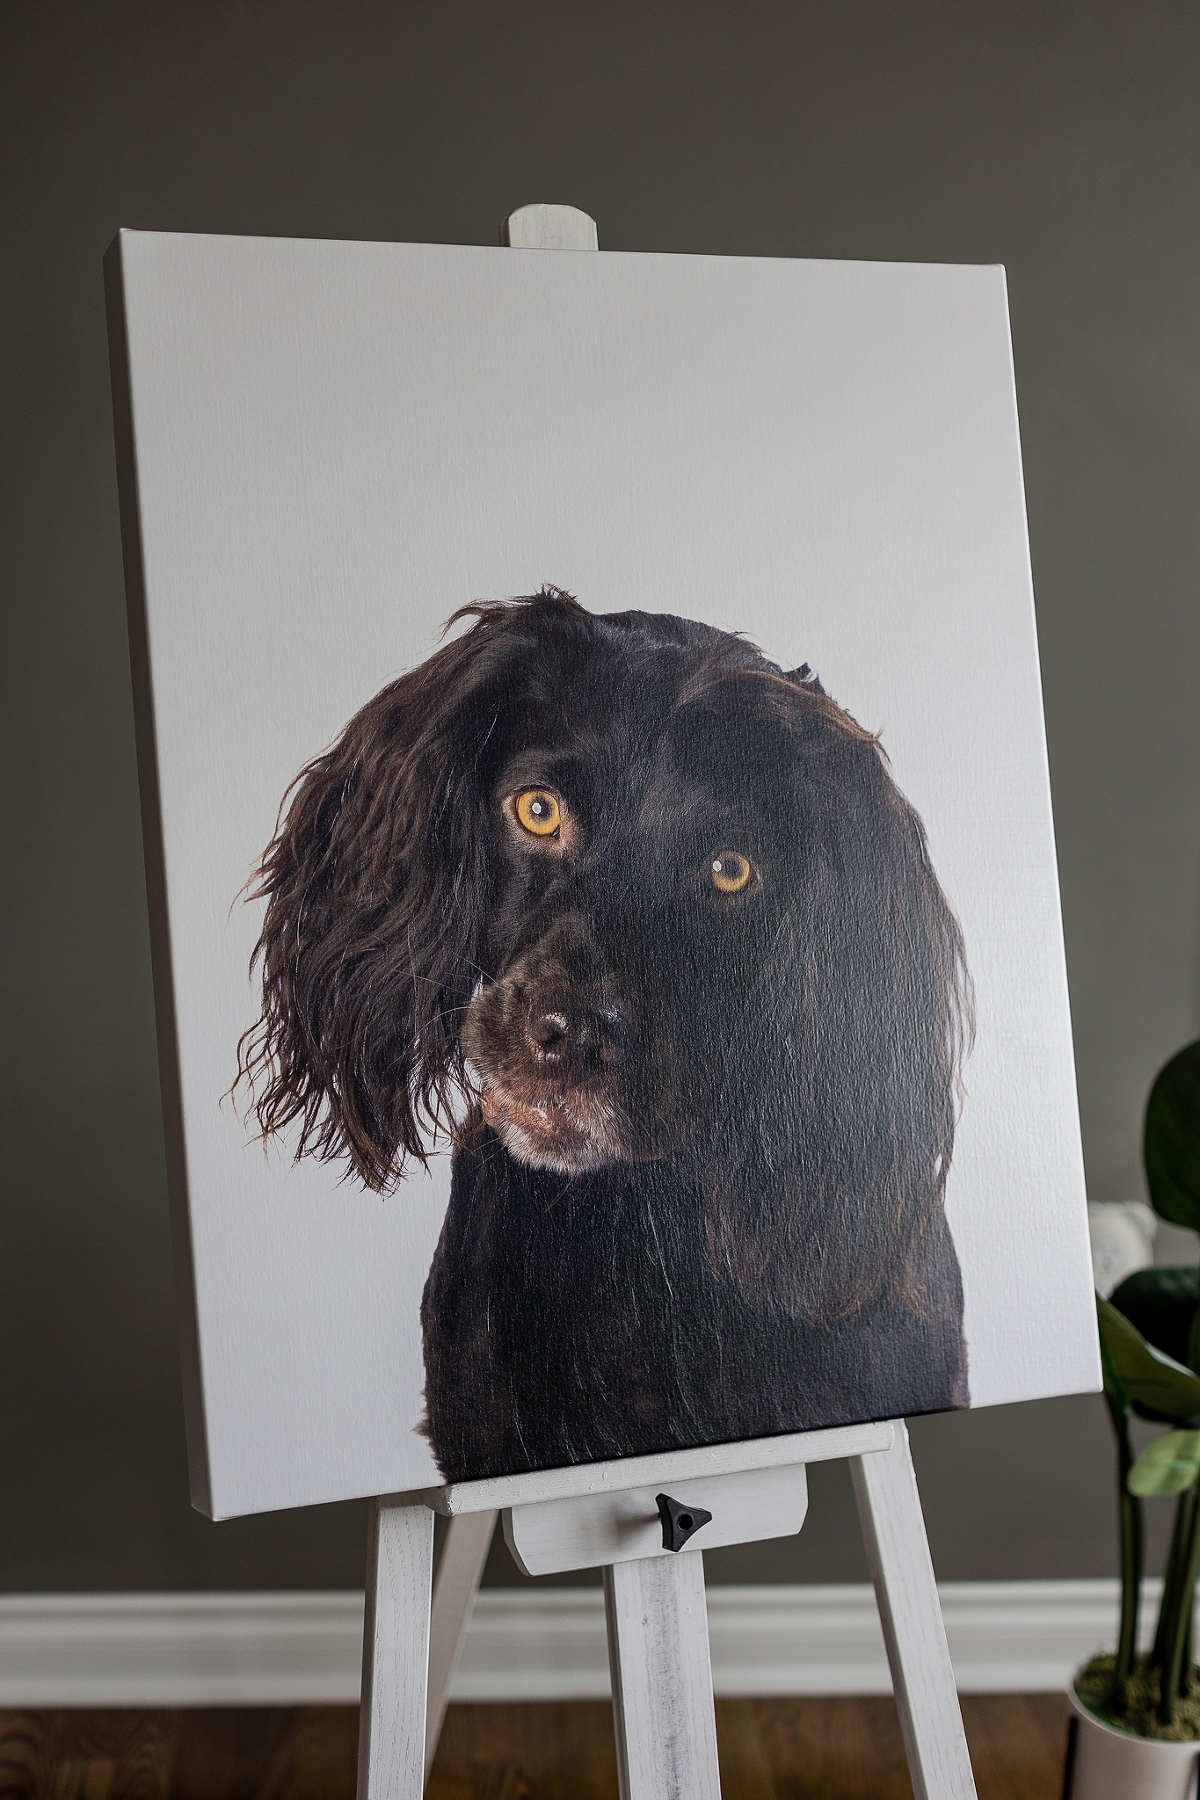 A realistic painting of a black dog displayed on an easel.